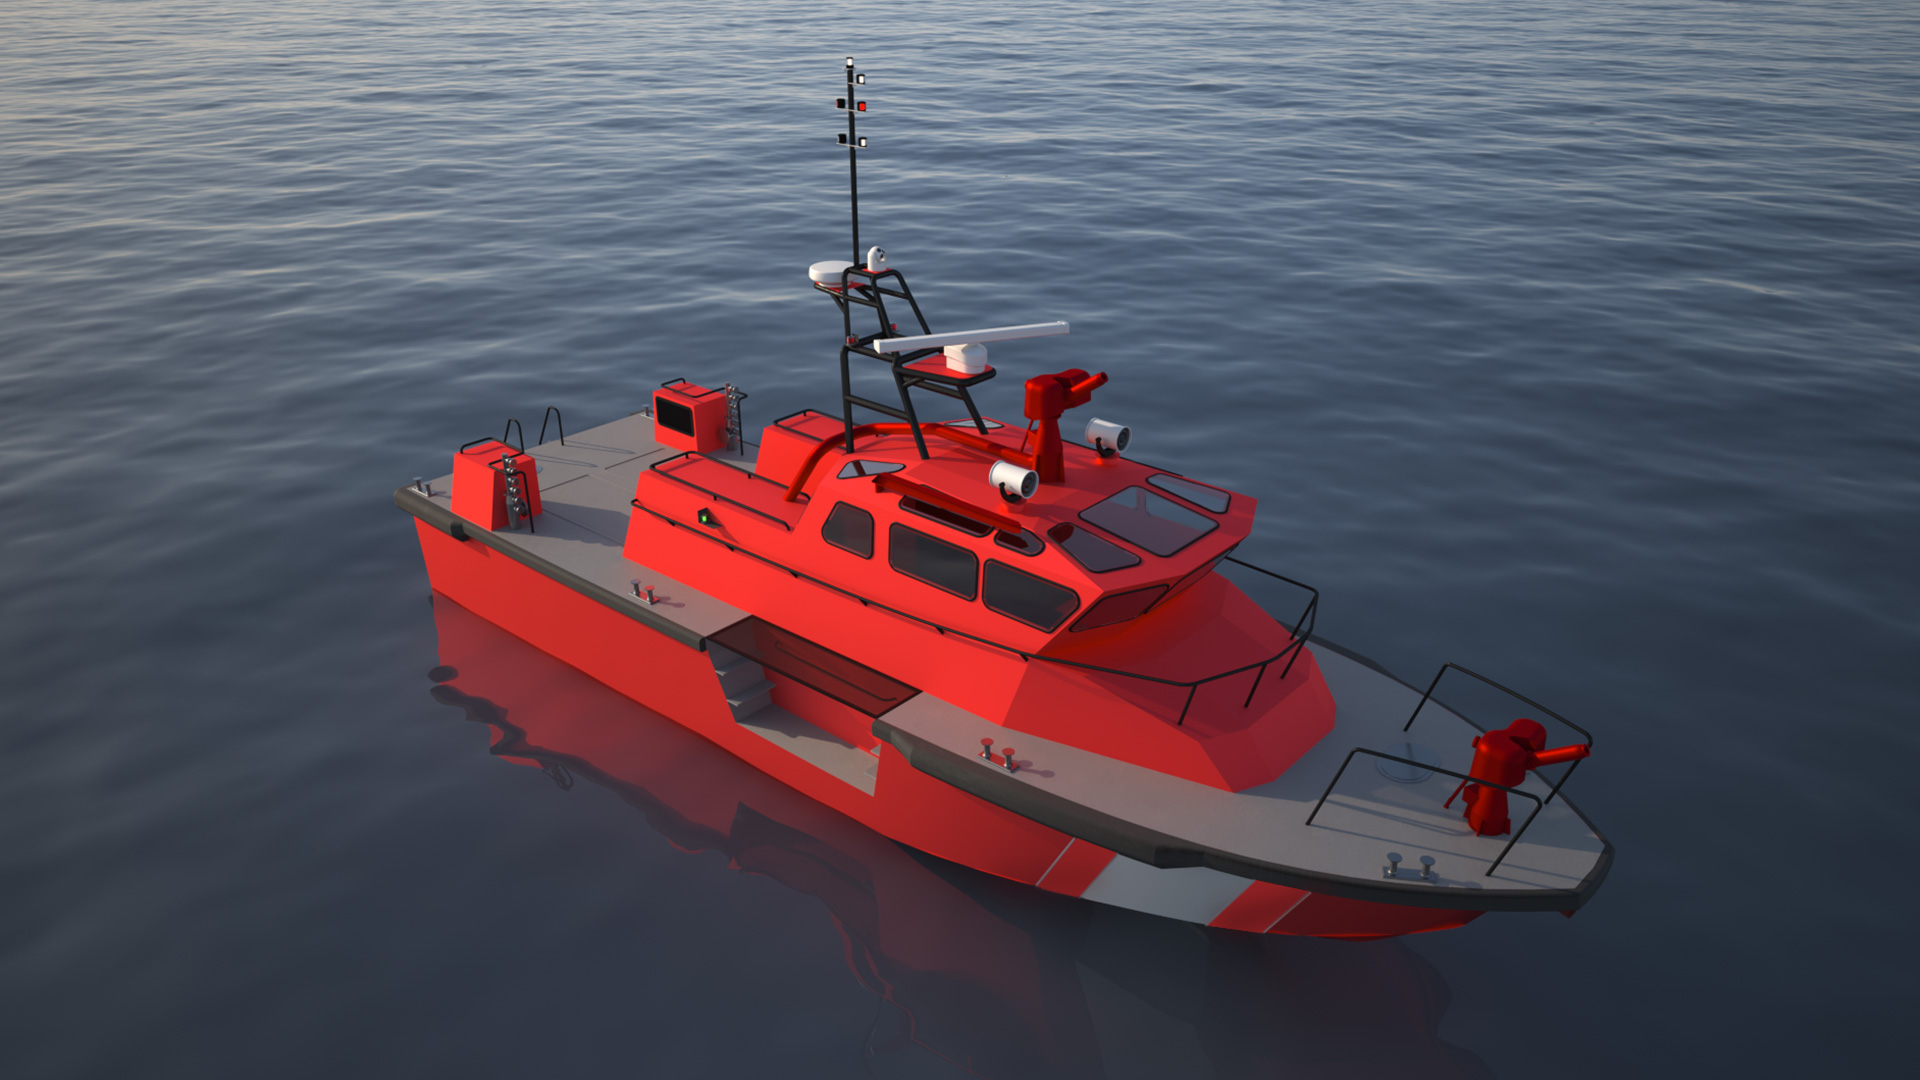 images/vessels/03-utility-support-craft/02-fire-fighting-vessels/04-ares-20-fifi/ares-20-fifi-01_1687355369.jpg